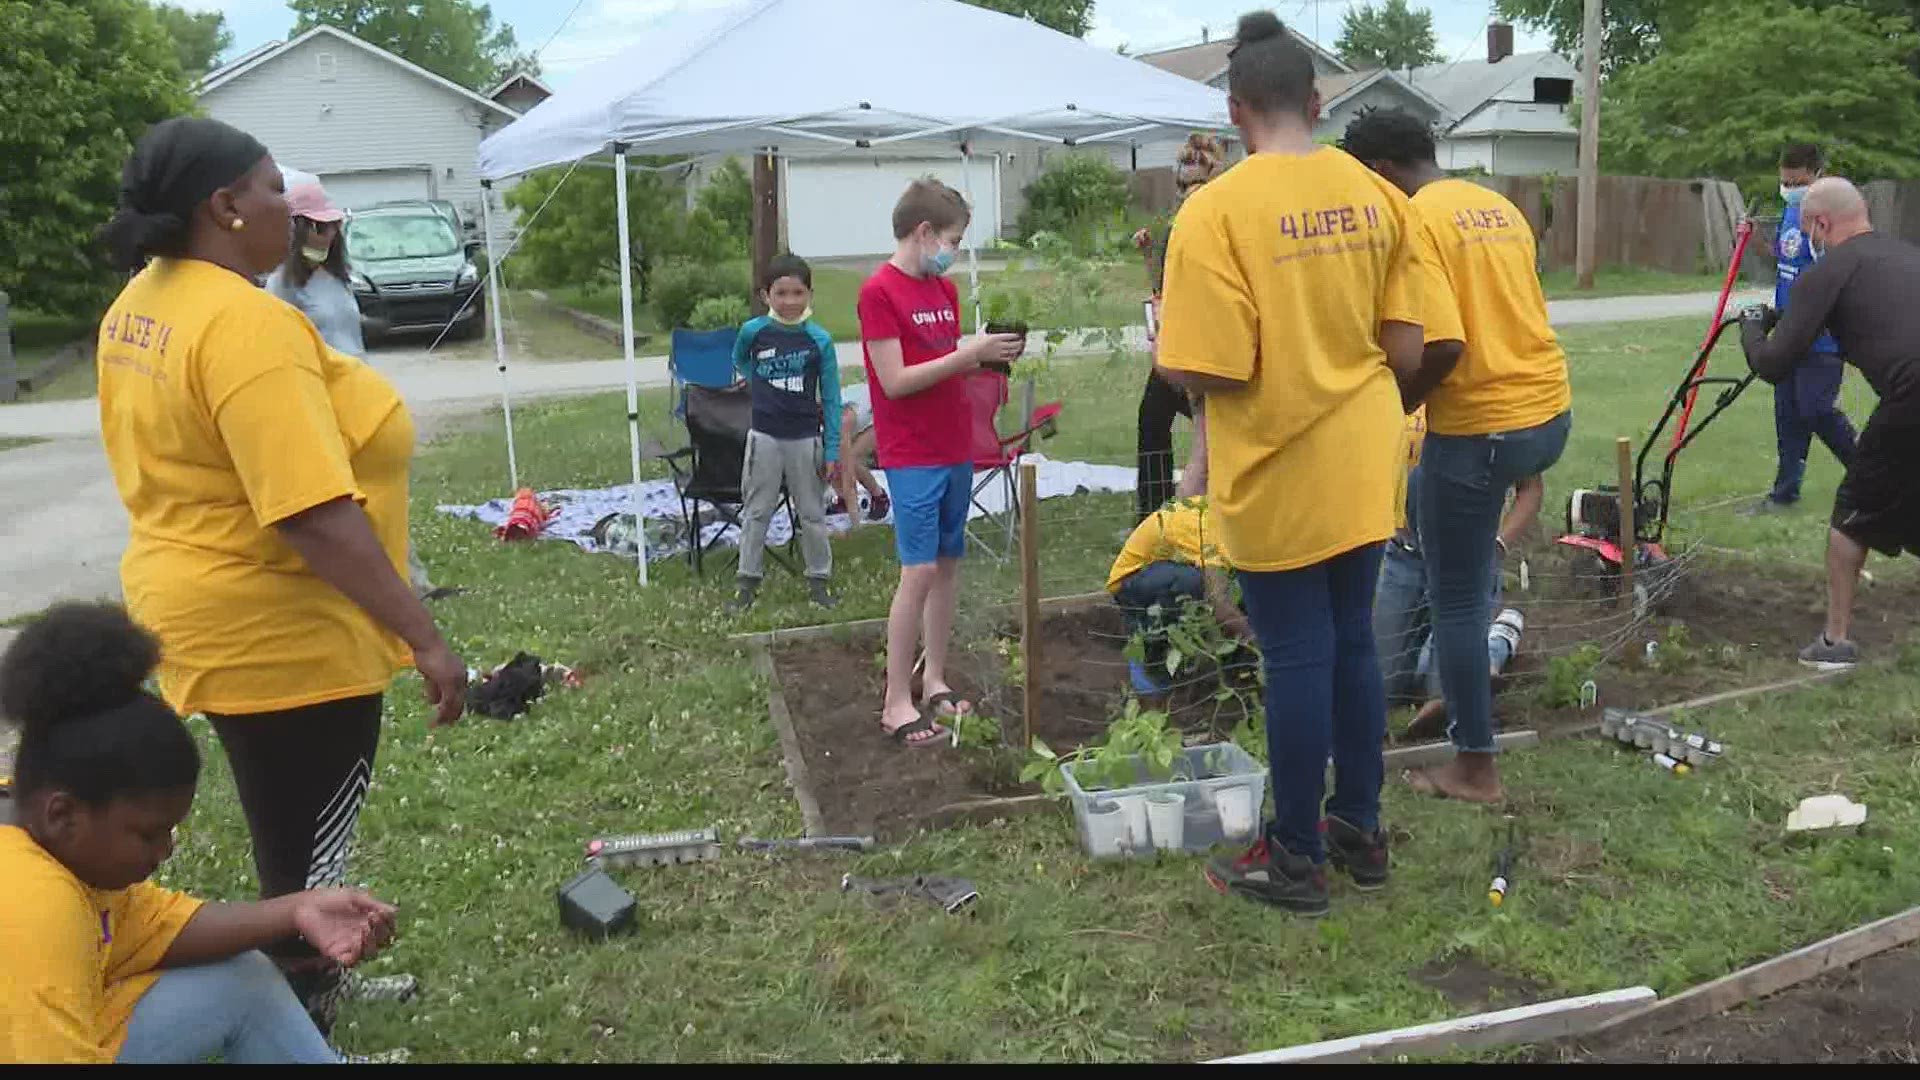 Two youth groups partnered to plant organic tomatoes, herbs, flowers, peppers and melons.